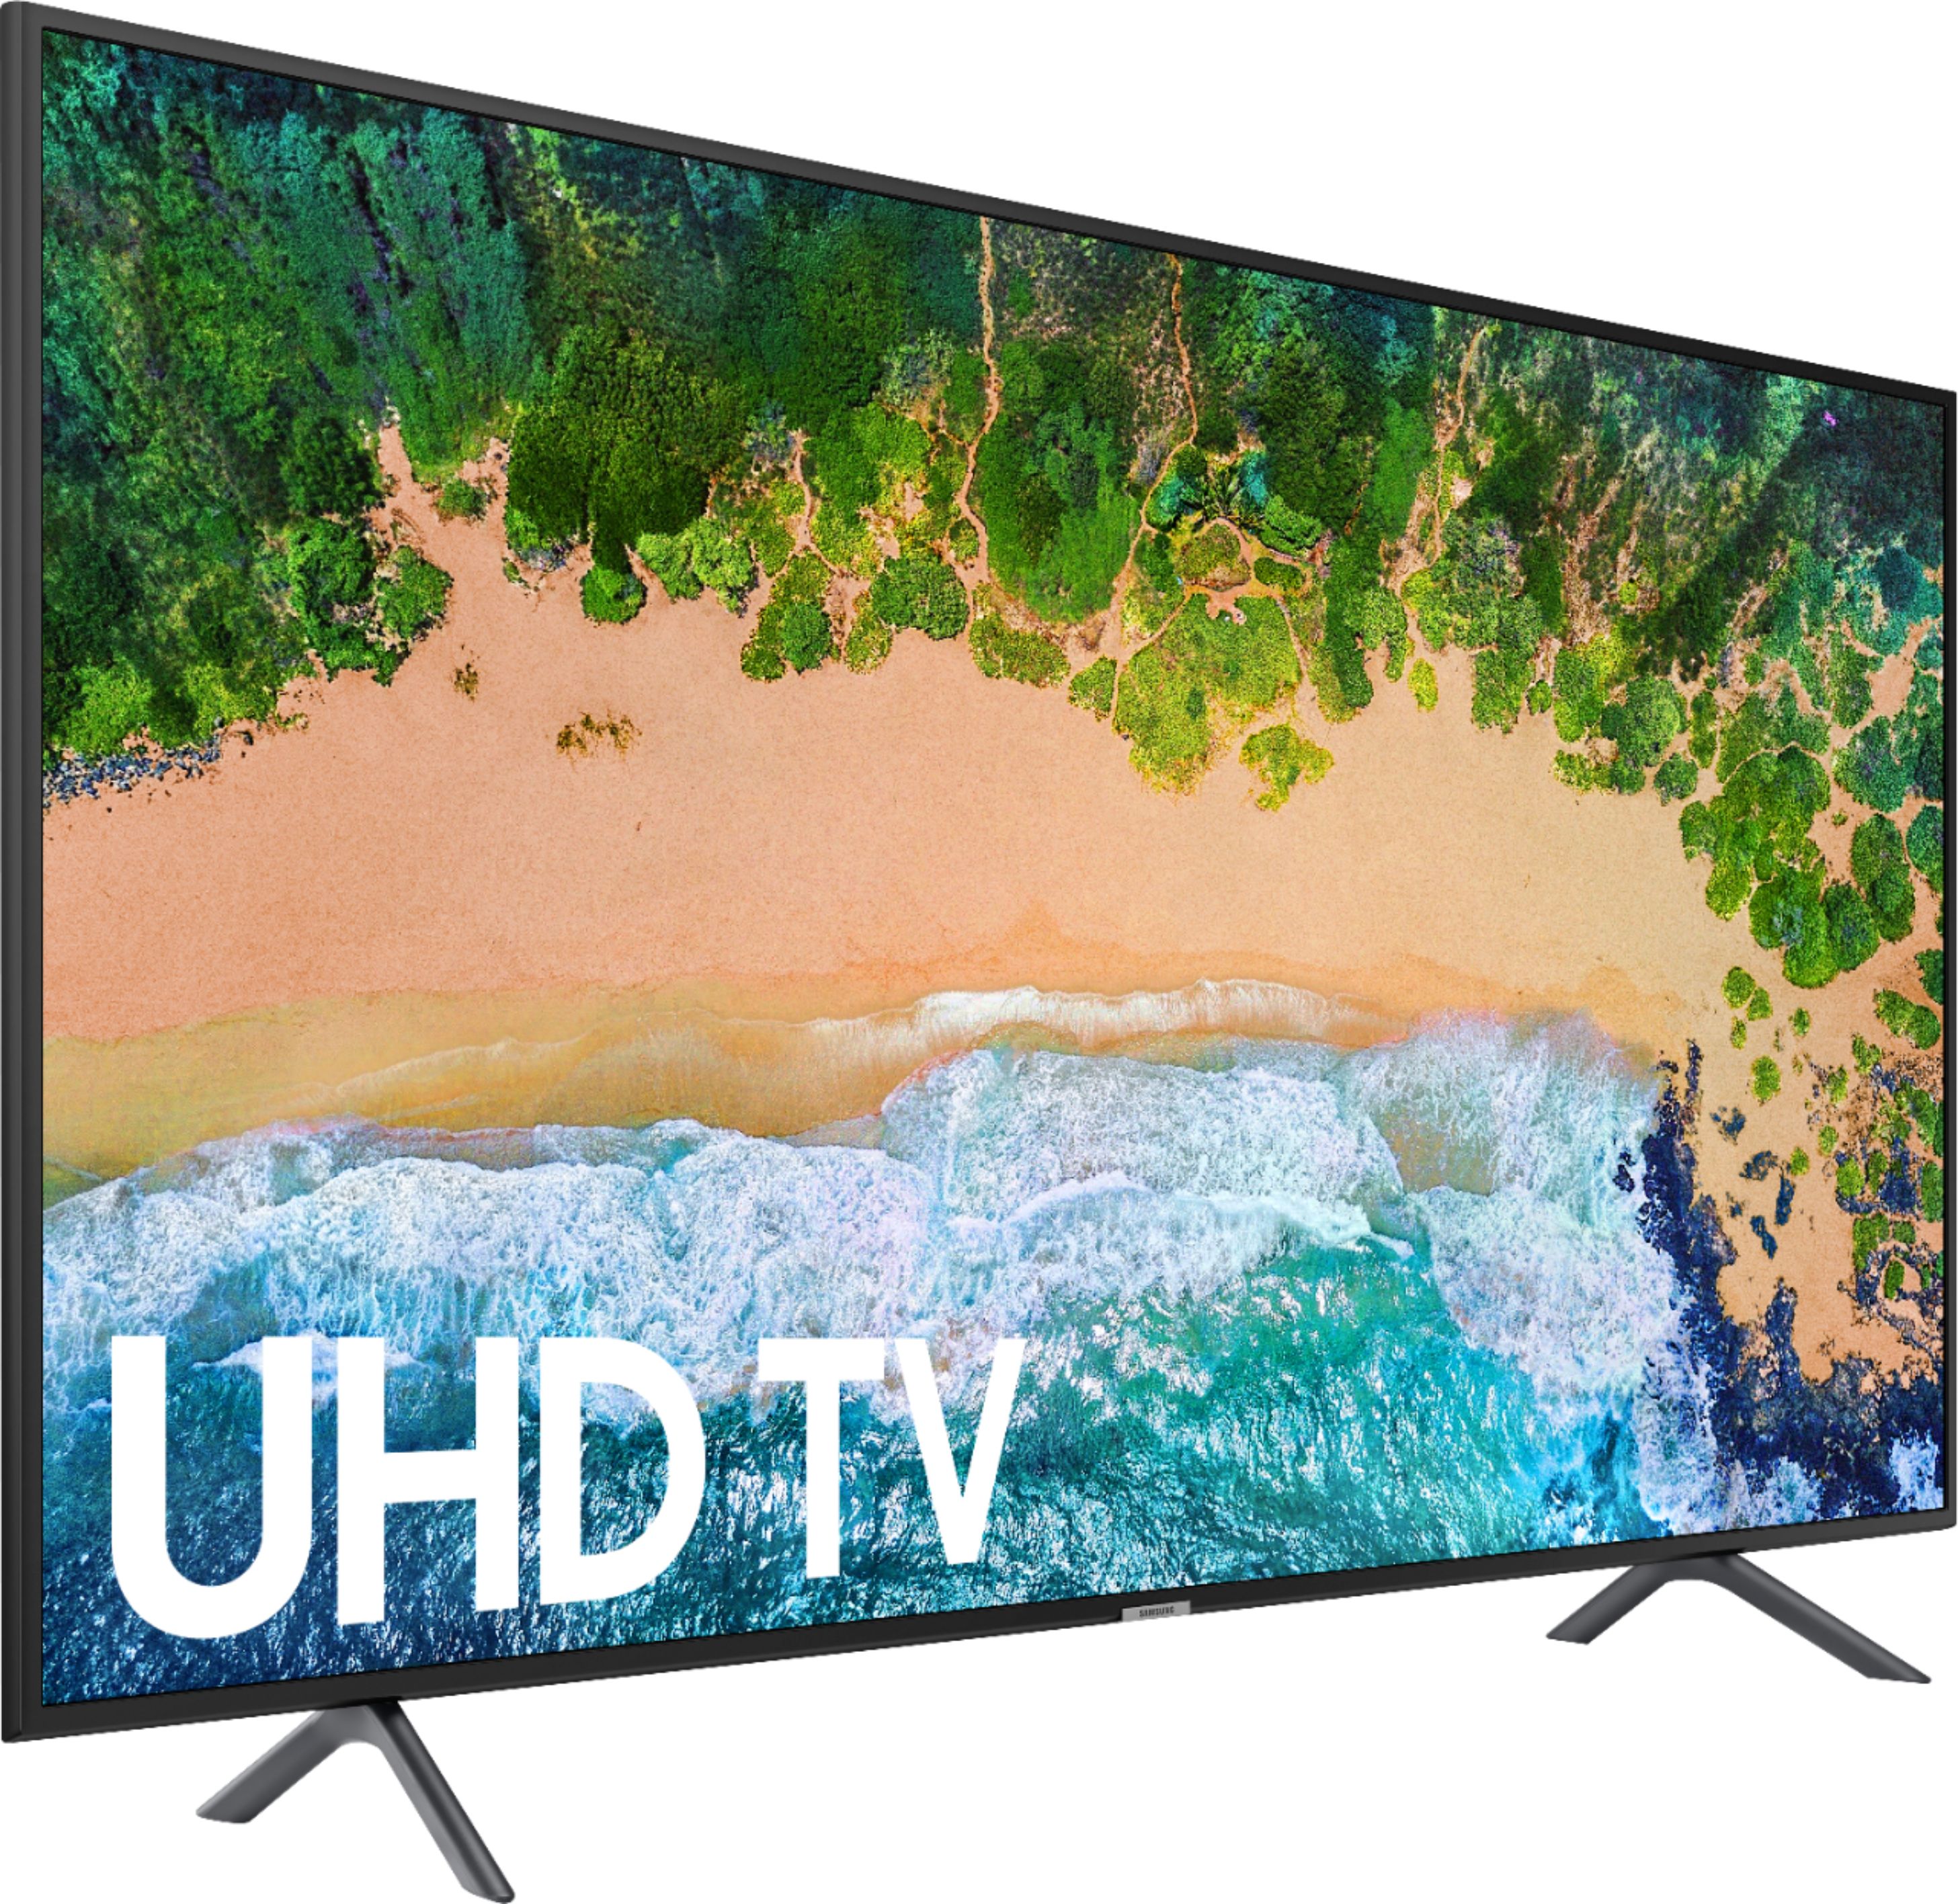 Best Buy: Samsung 75" Class LED Series 2160p Smart 4K UHD TV with